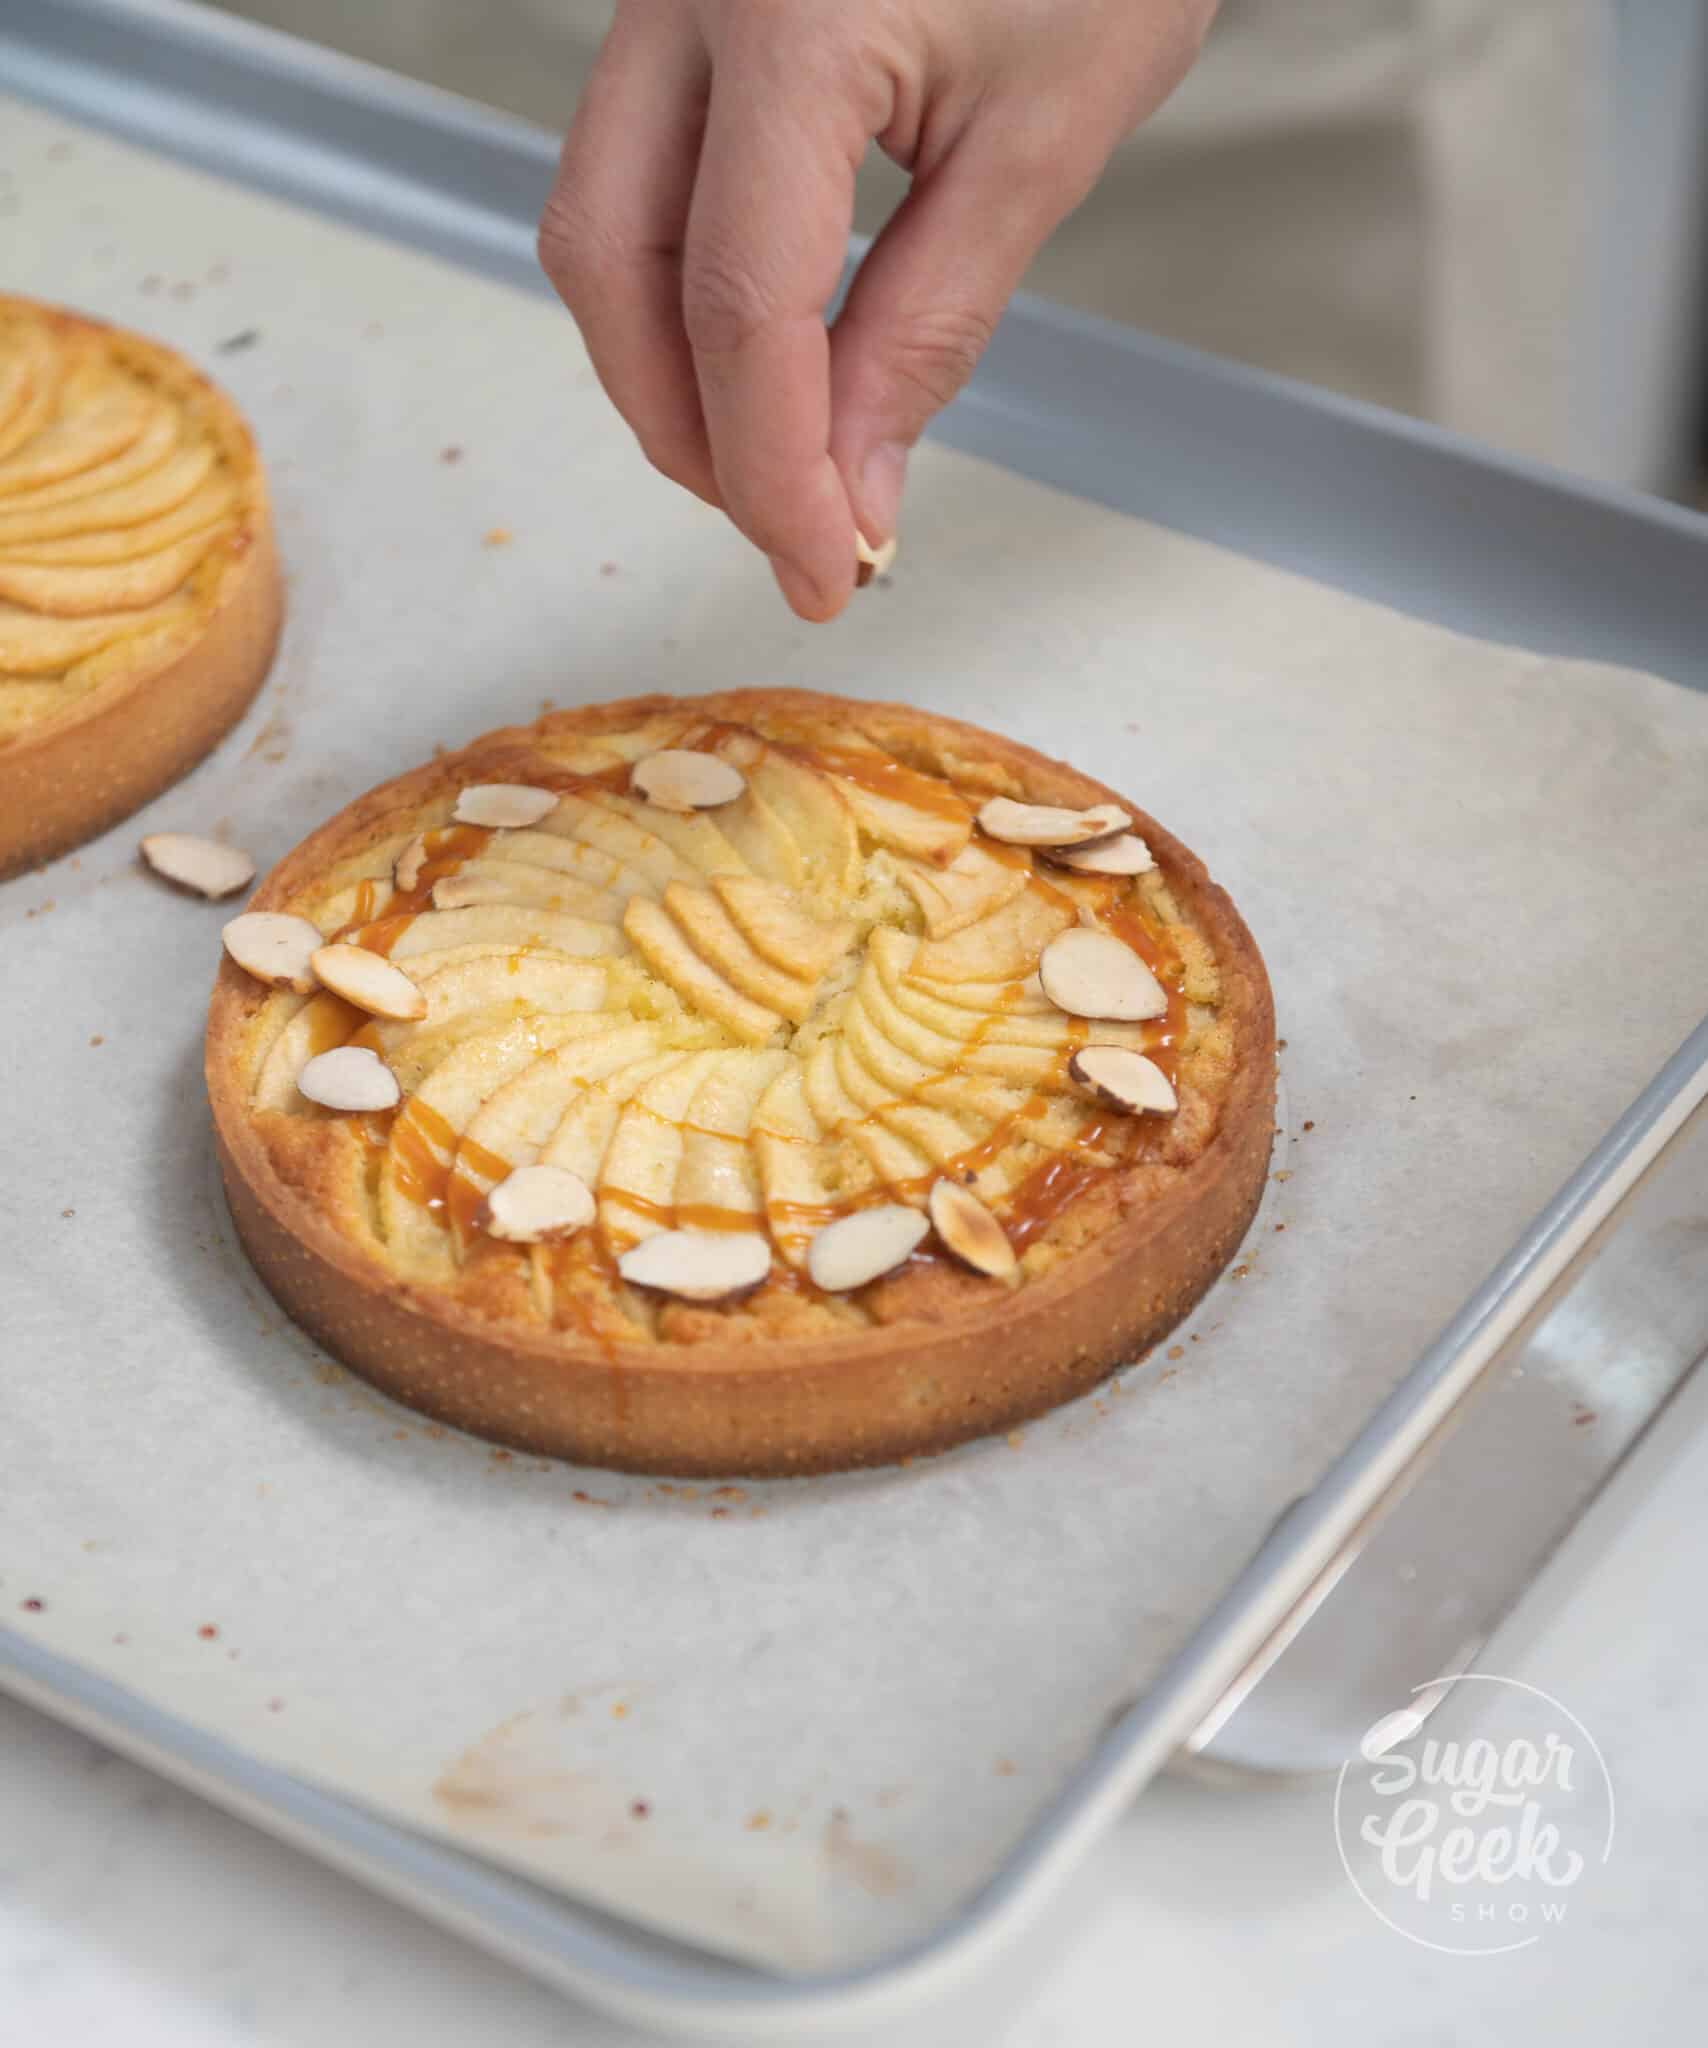 hands adding toasted almonds to tart.